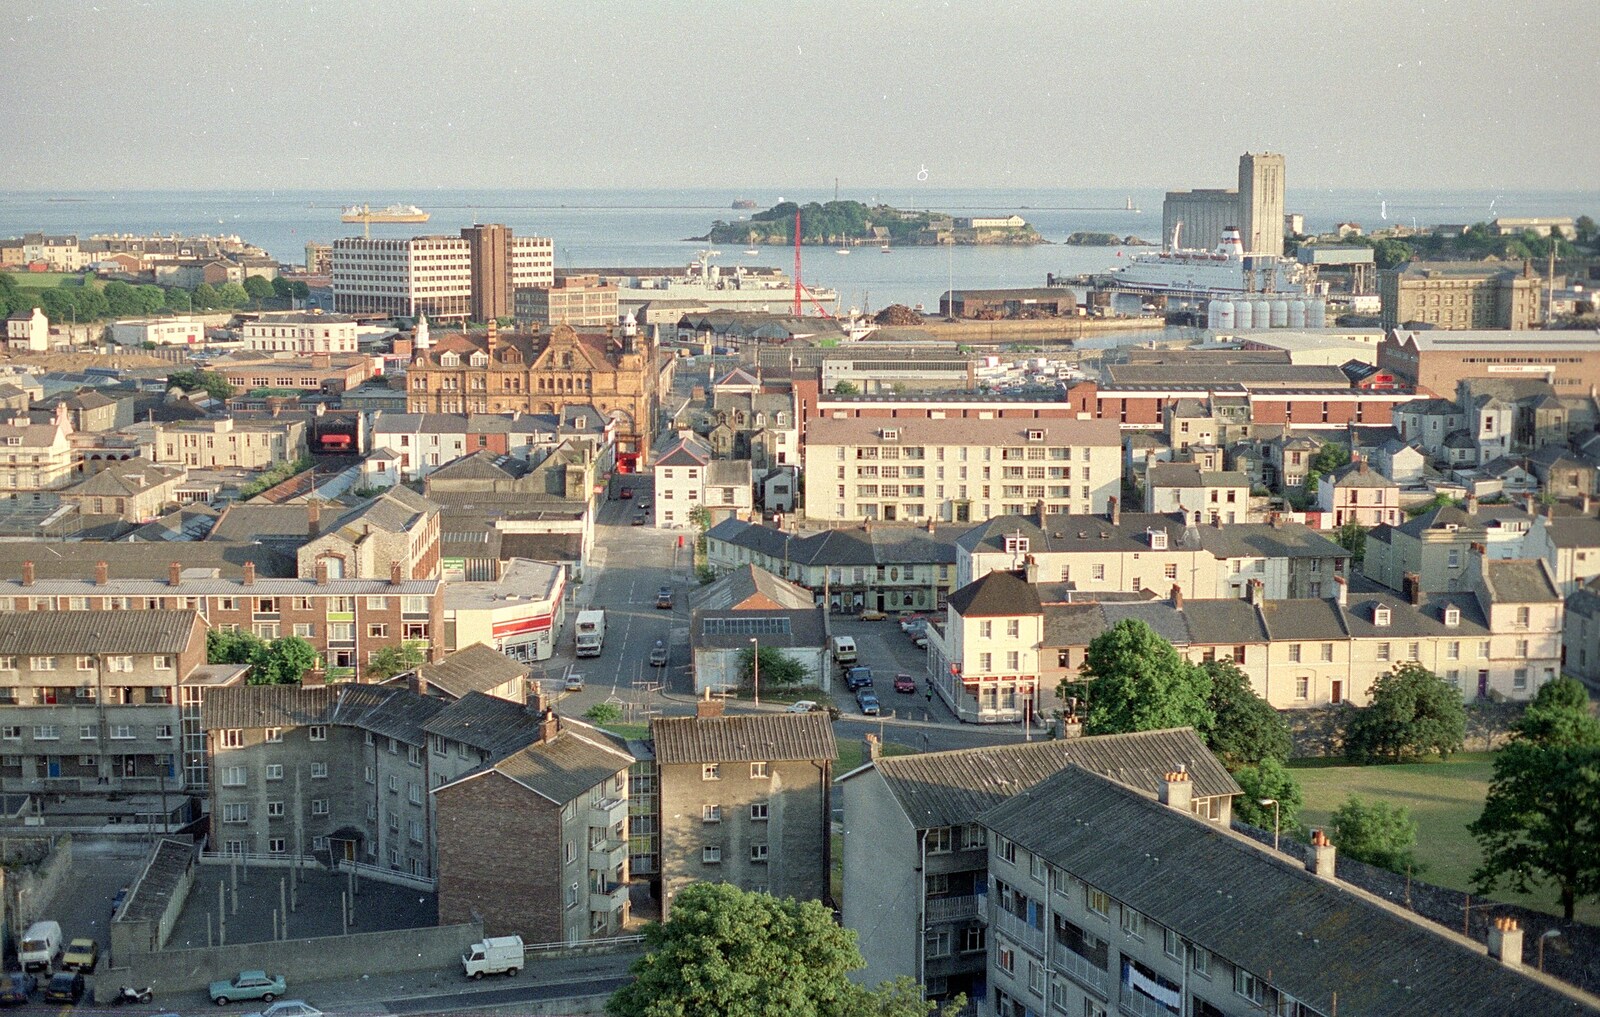 Looking towards Drake's Island, with F126 in port from Uni: Views From St. Peter's Church Tower, Wyndham Square, Plymouth, Devon - 15th June 1989